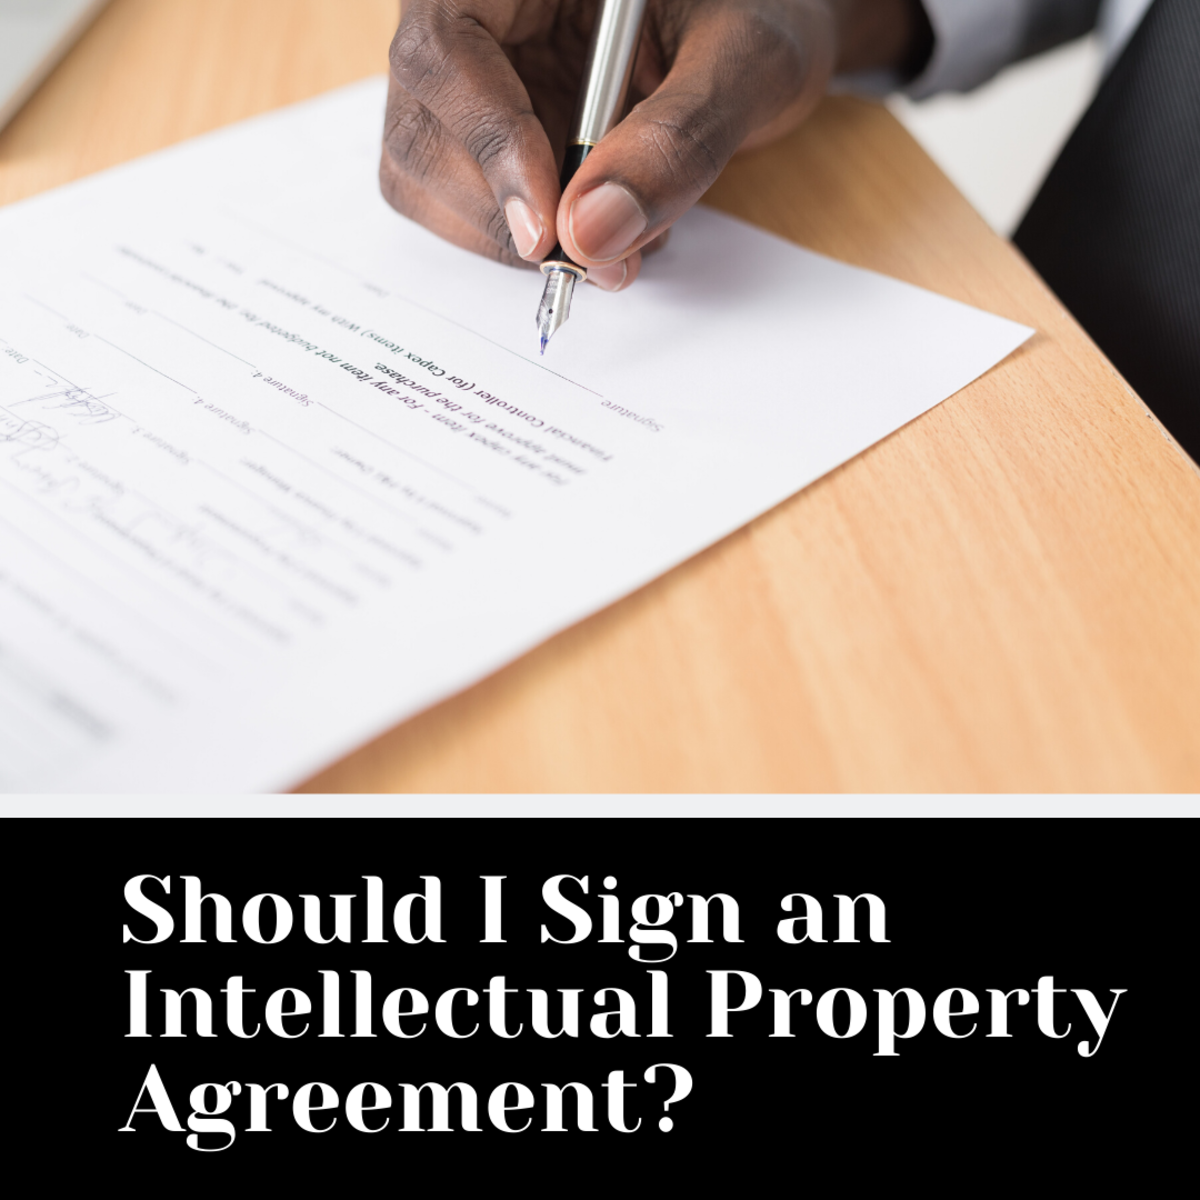 Should I Sign an Intellectual Property Agreement?